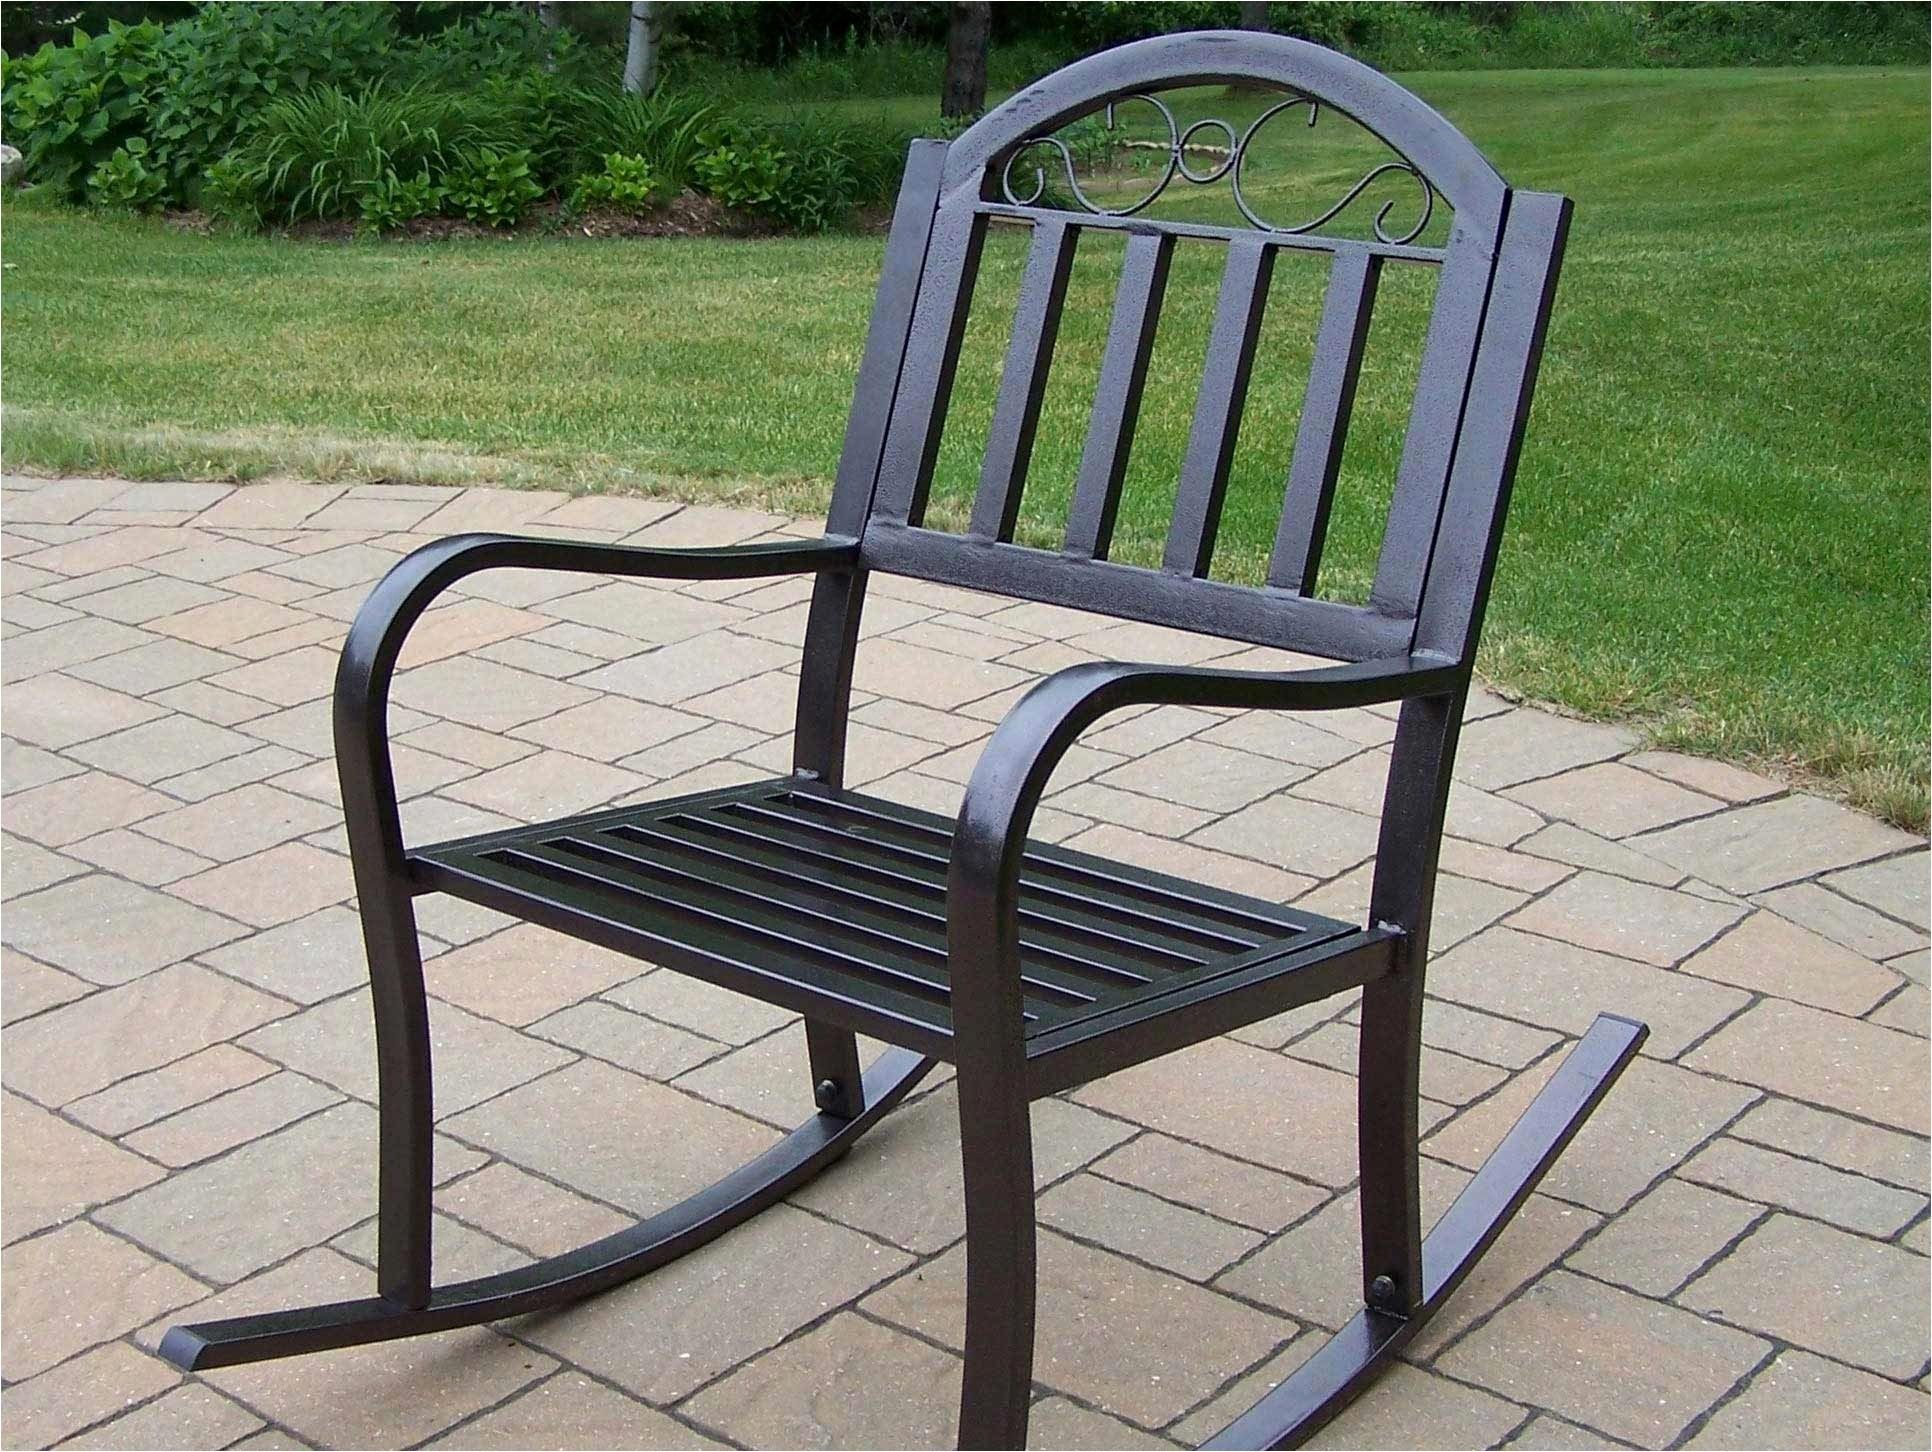 Metal Outdoor Rocking Chairs Awesome Aluminum Rocking Chairs Patio Throughout Outdoor Patio Metal Rocking Chairs (Photo 4 of 15)